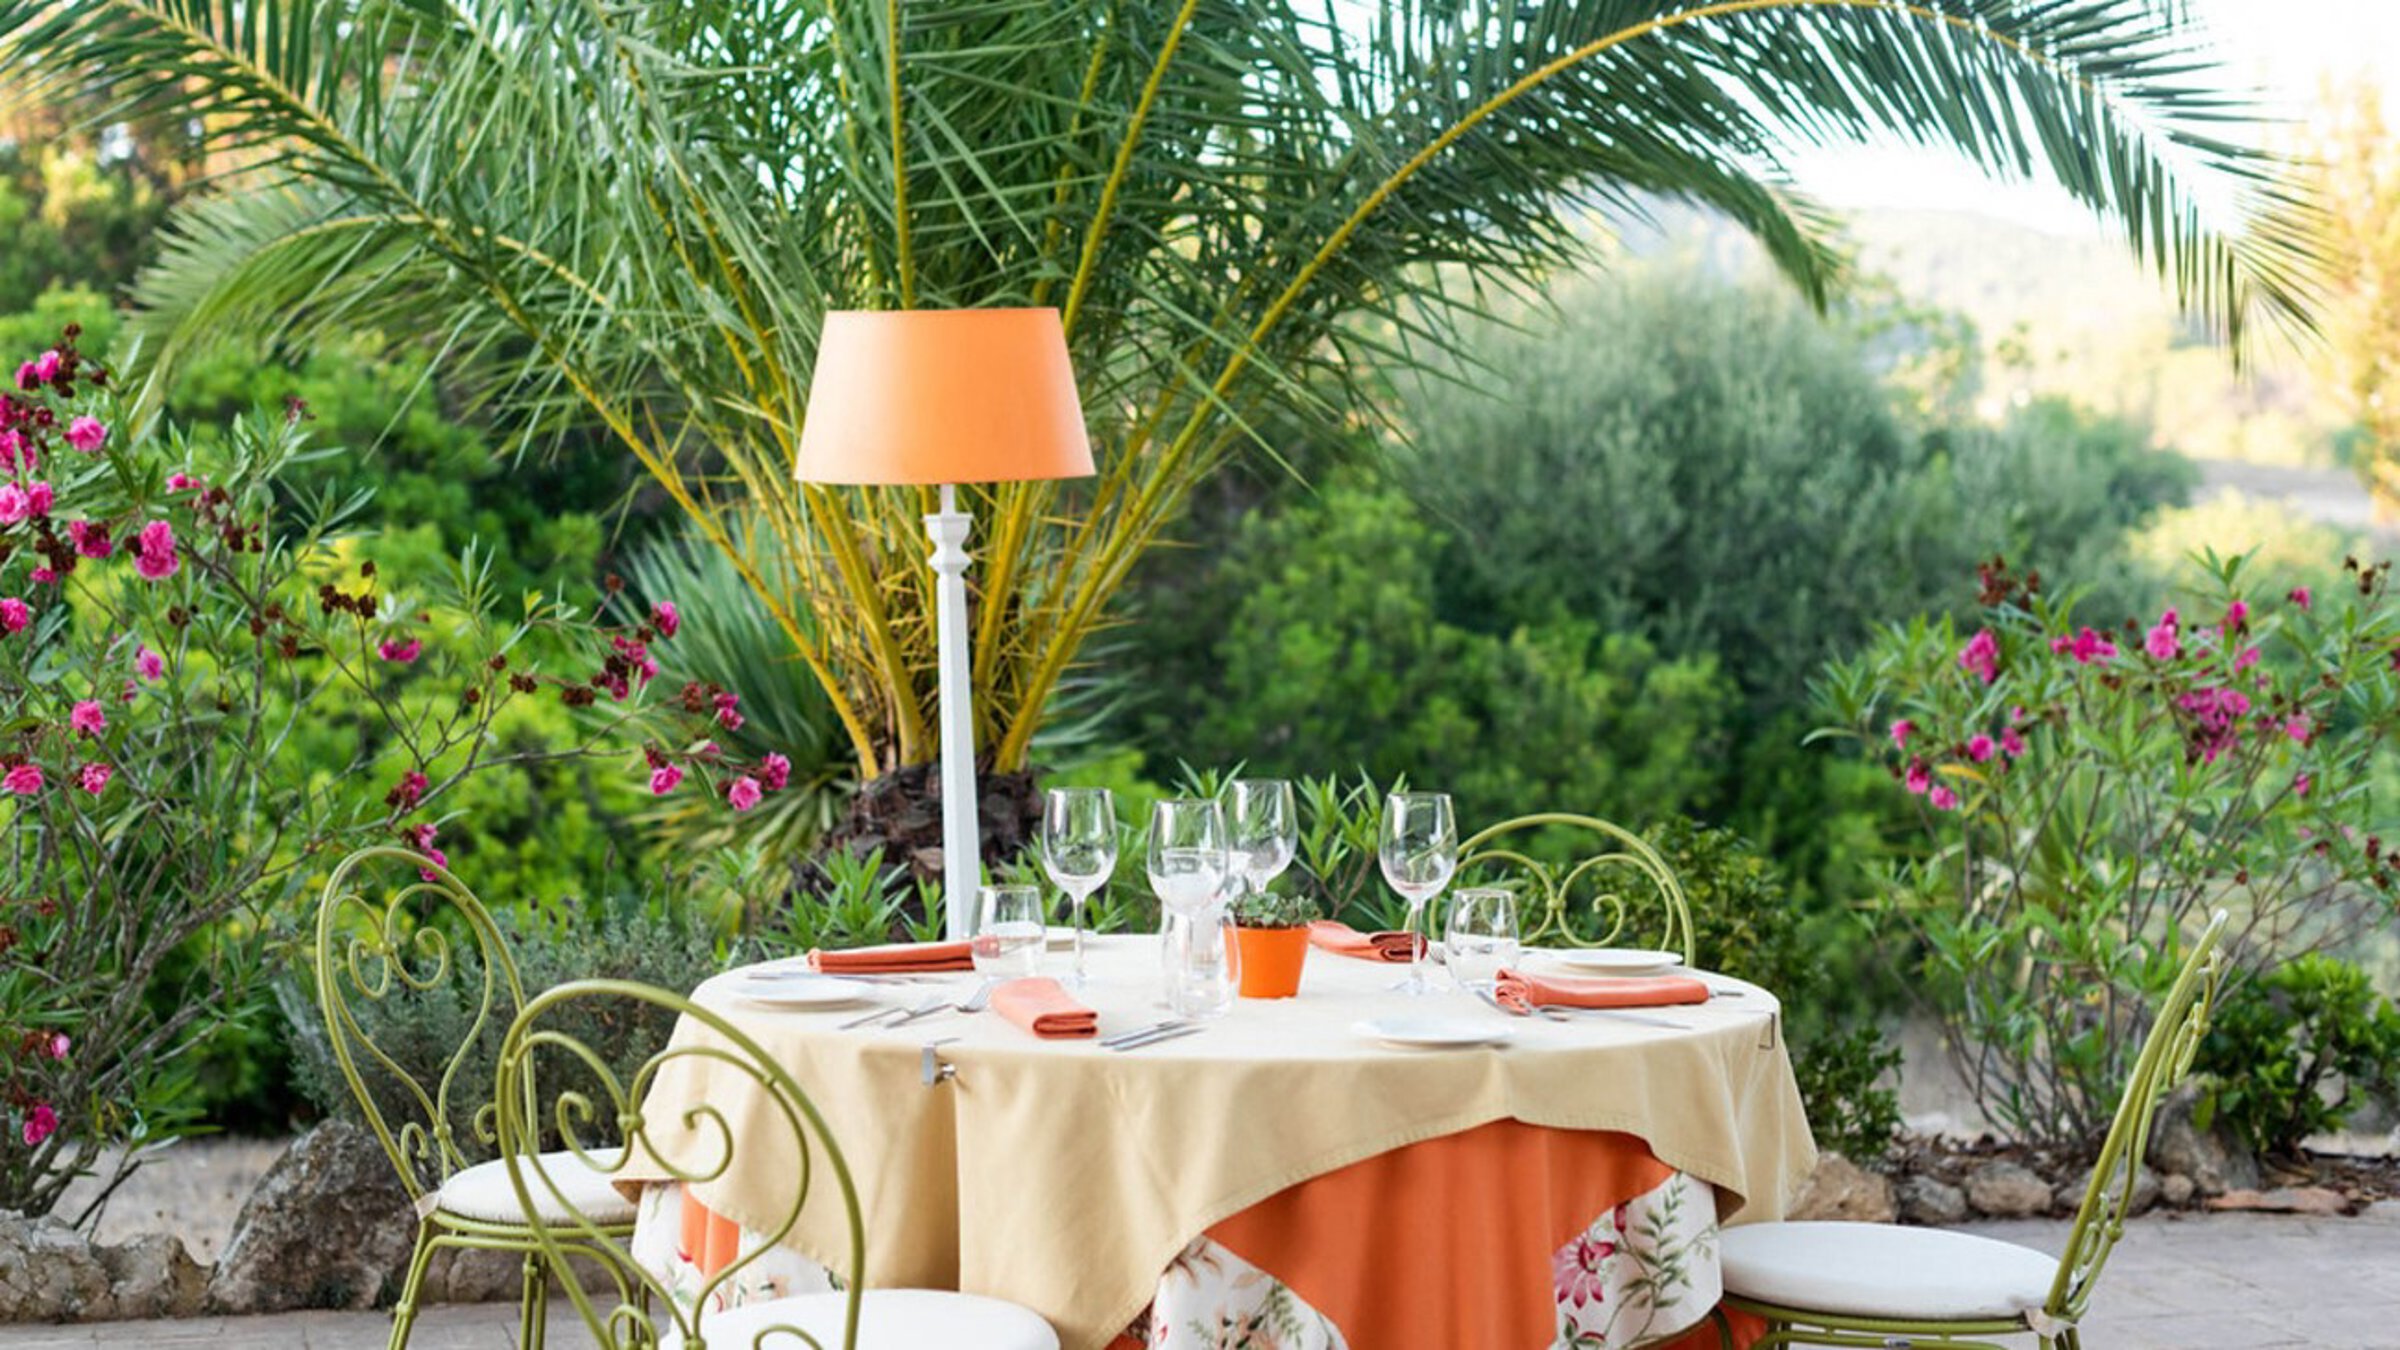 Round Table With Chairs, Lamp In A Green Garden With Palms